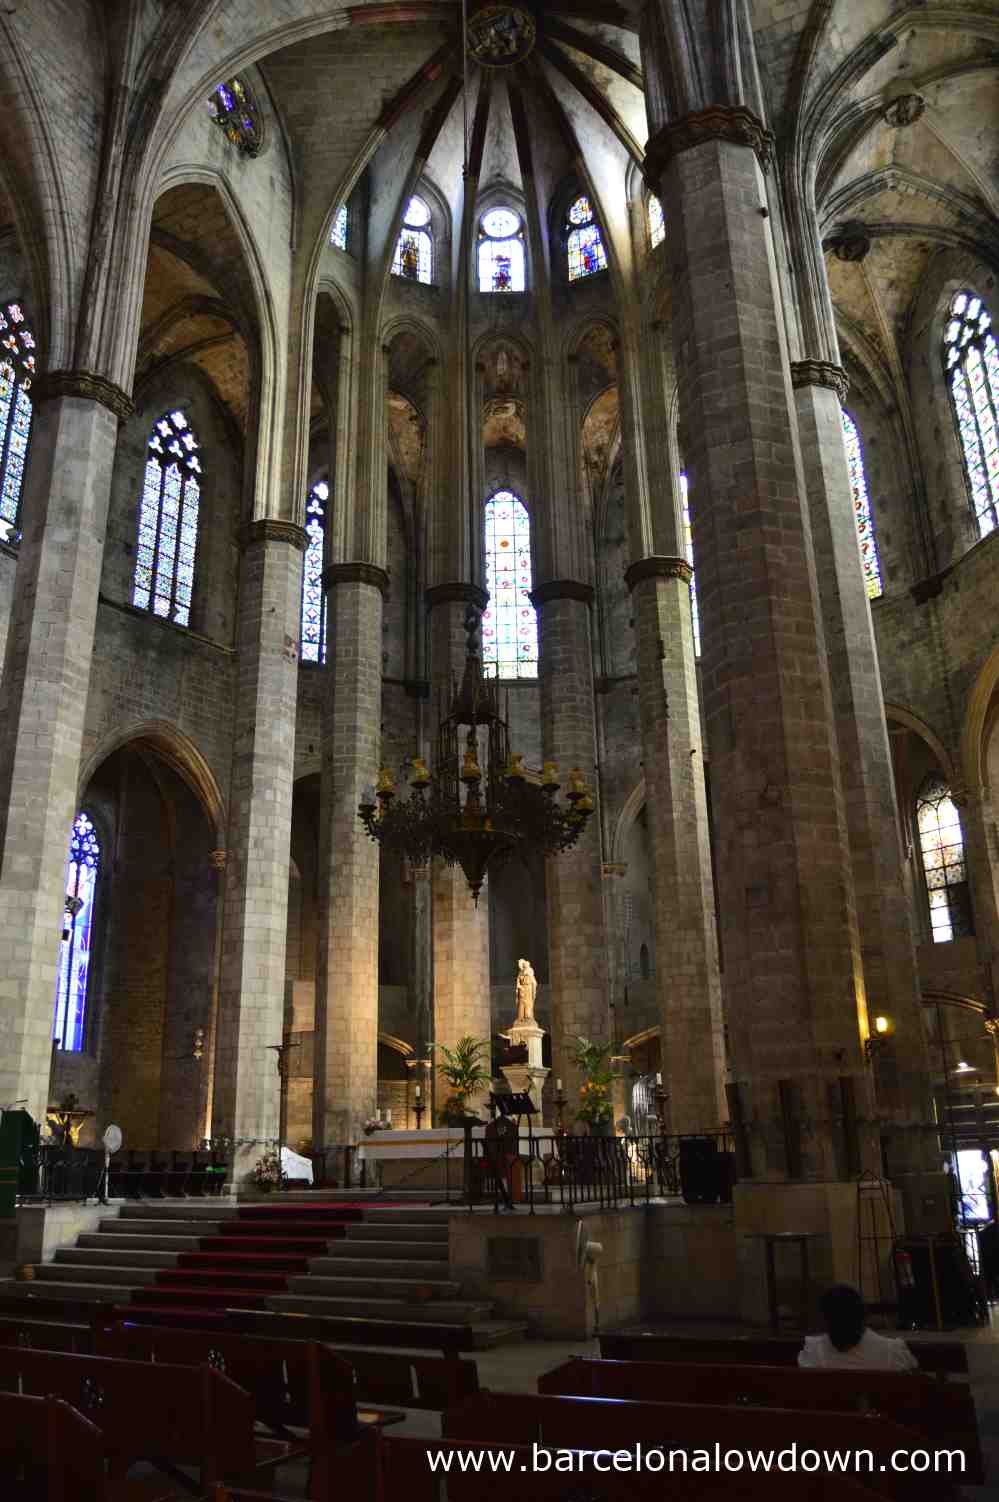 The altar and statue of the virgin Mary in Barcelona's Santa Maria del Mar basilica aka the Cathedral of the Sea